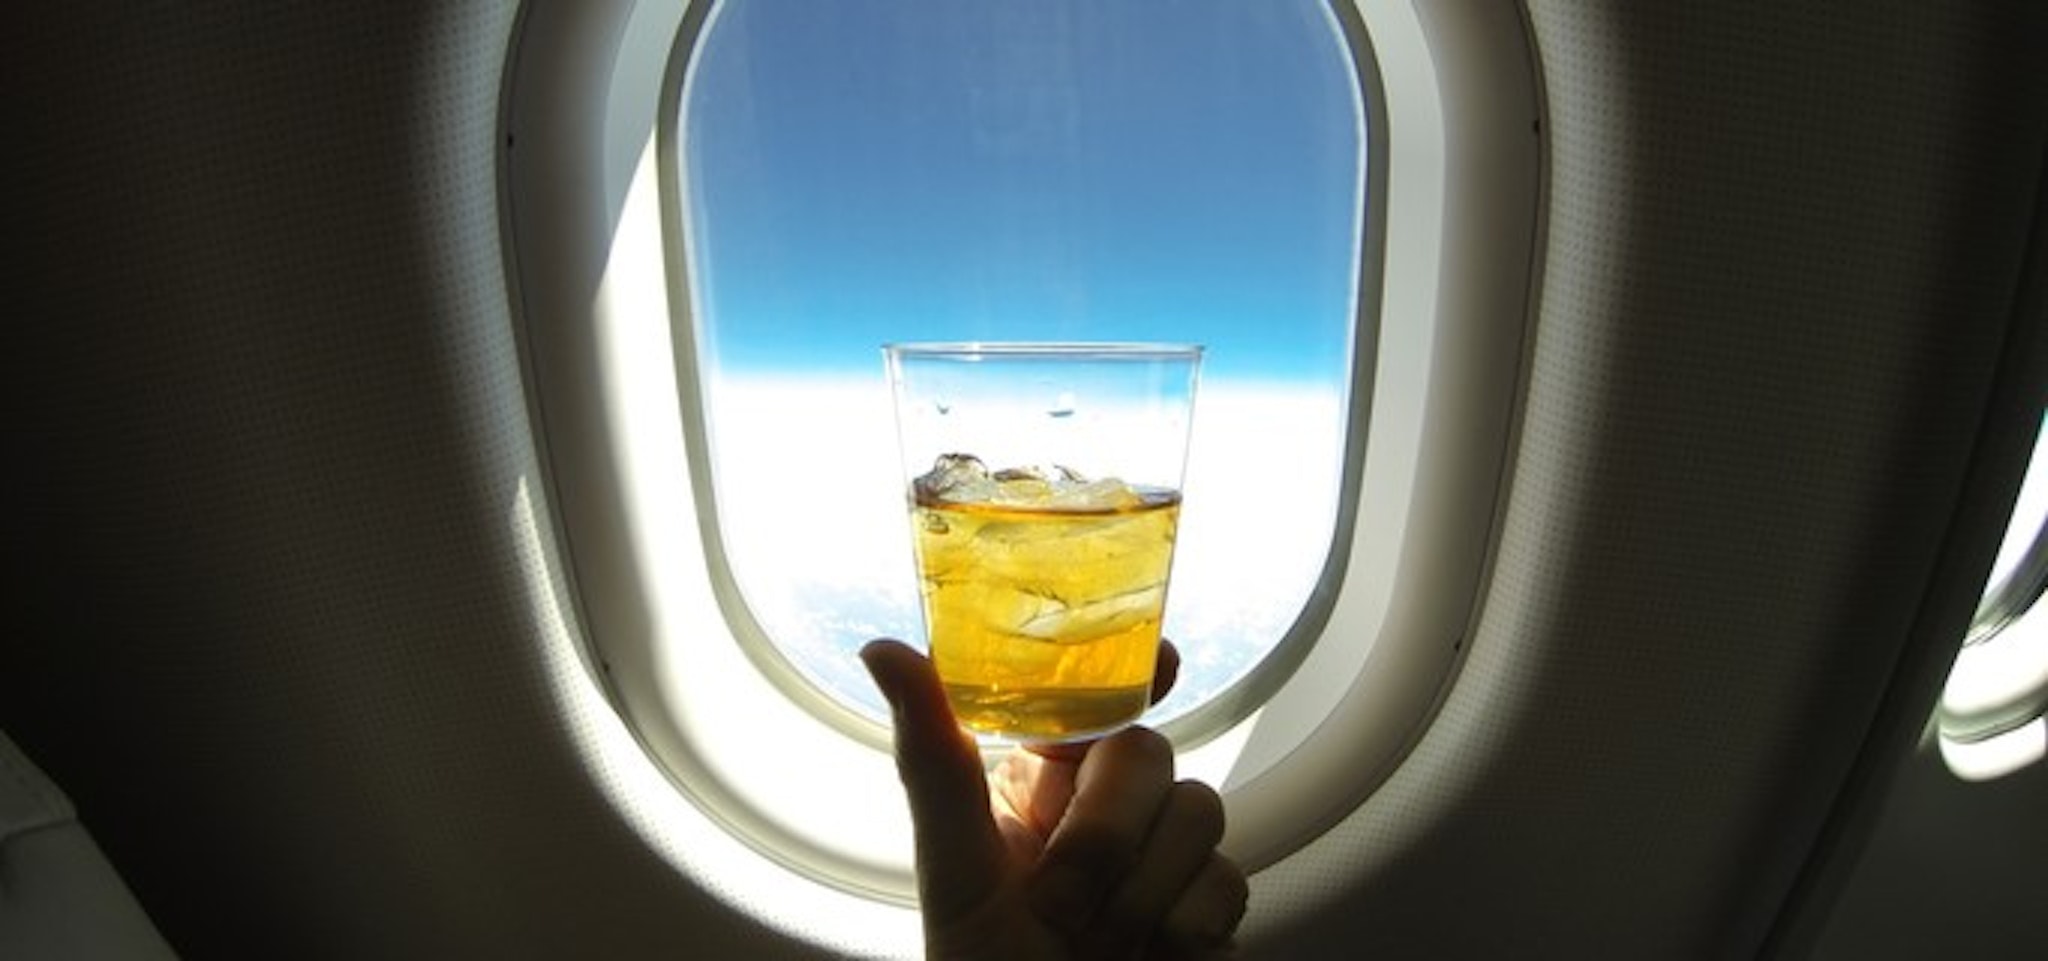 Refreshing glass of ice tea (or alcohol mix) centered on the window of a jumbo airplane, with blue sky above and snowy white clowds below.